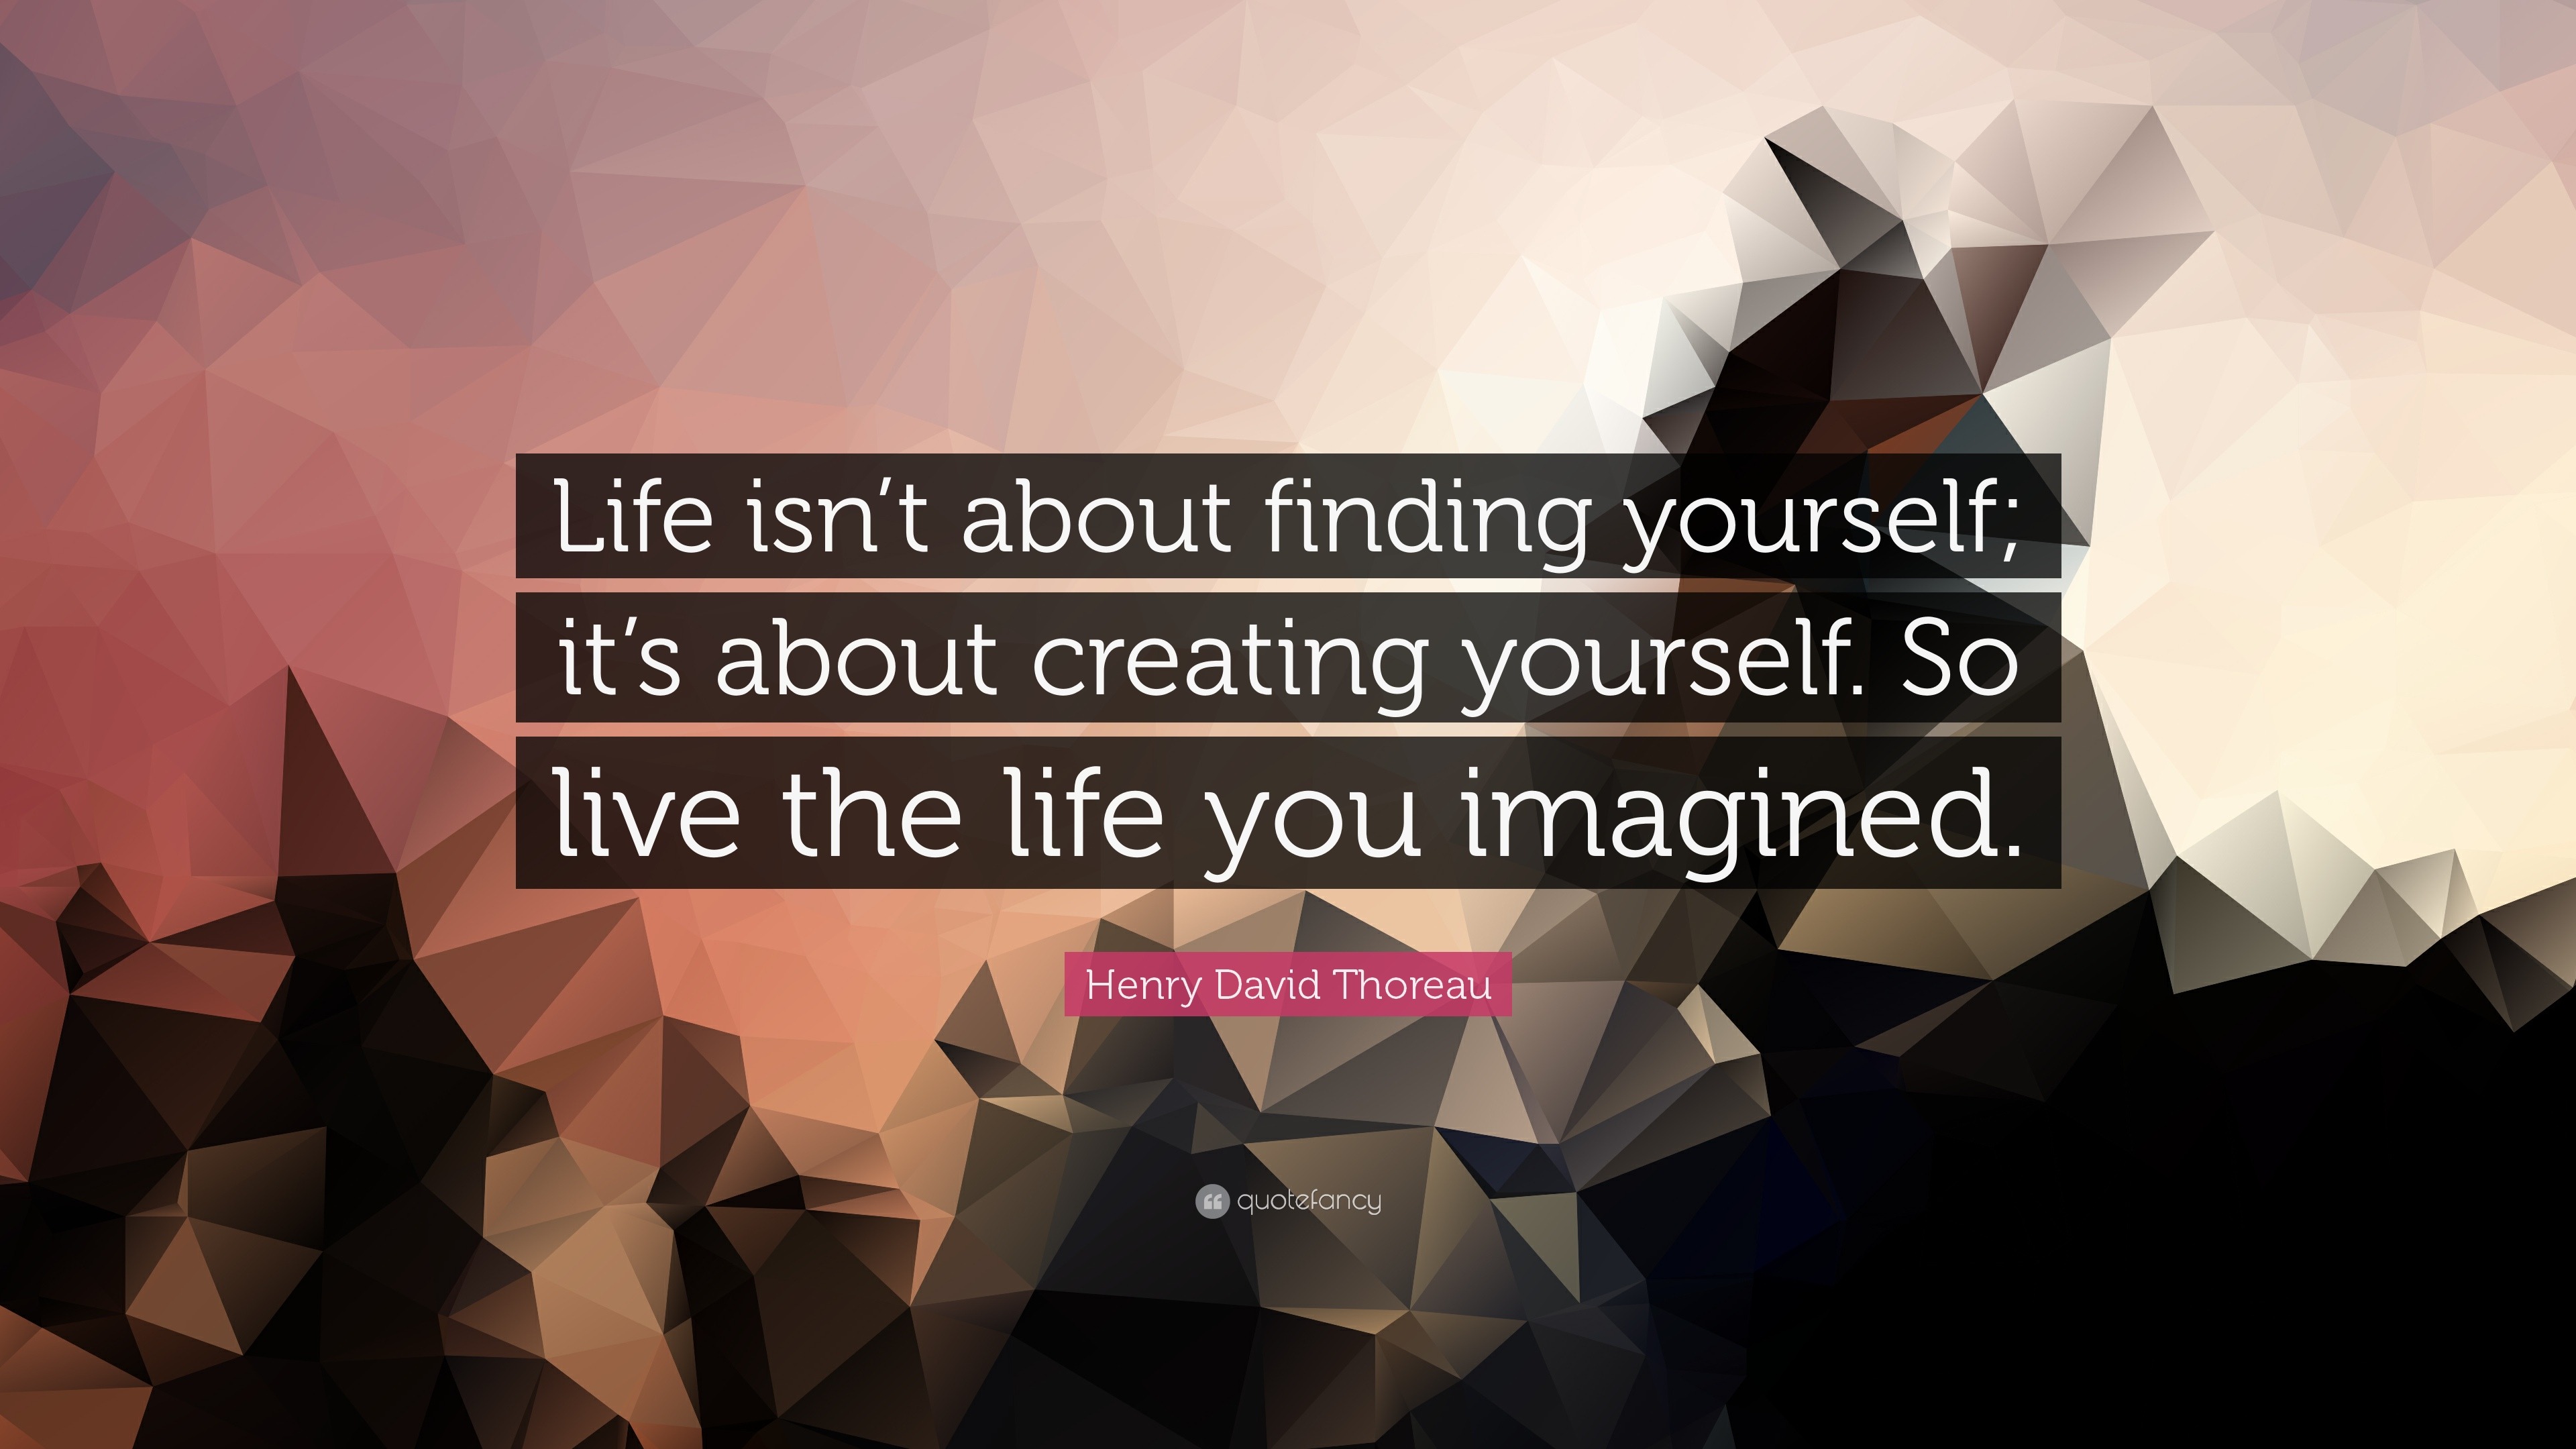 Henry David Thoreau Quote: “Life isn’t about finding yourself; it’s